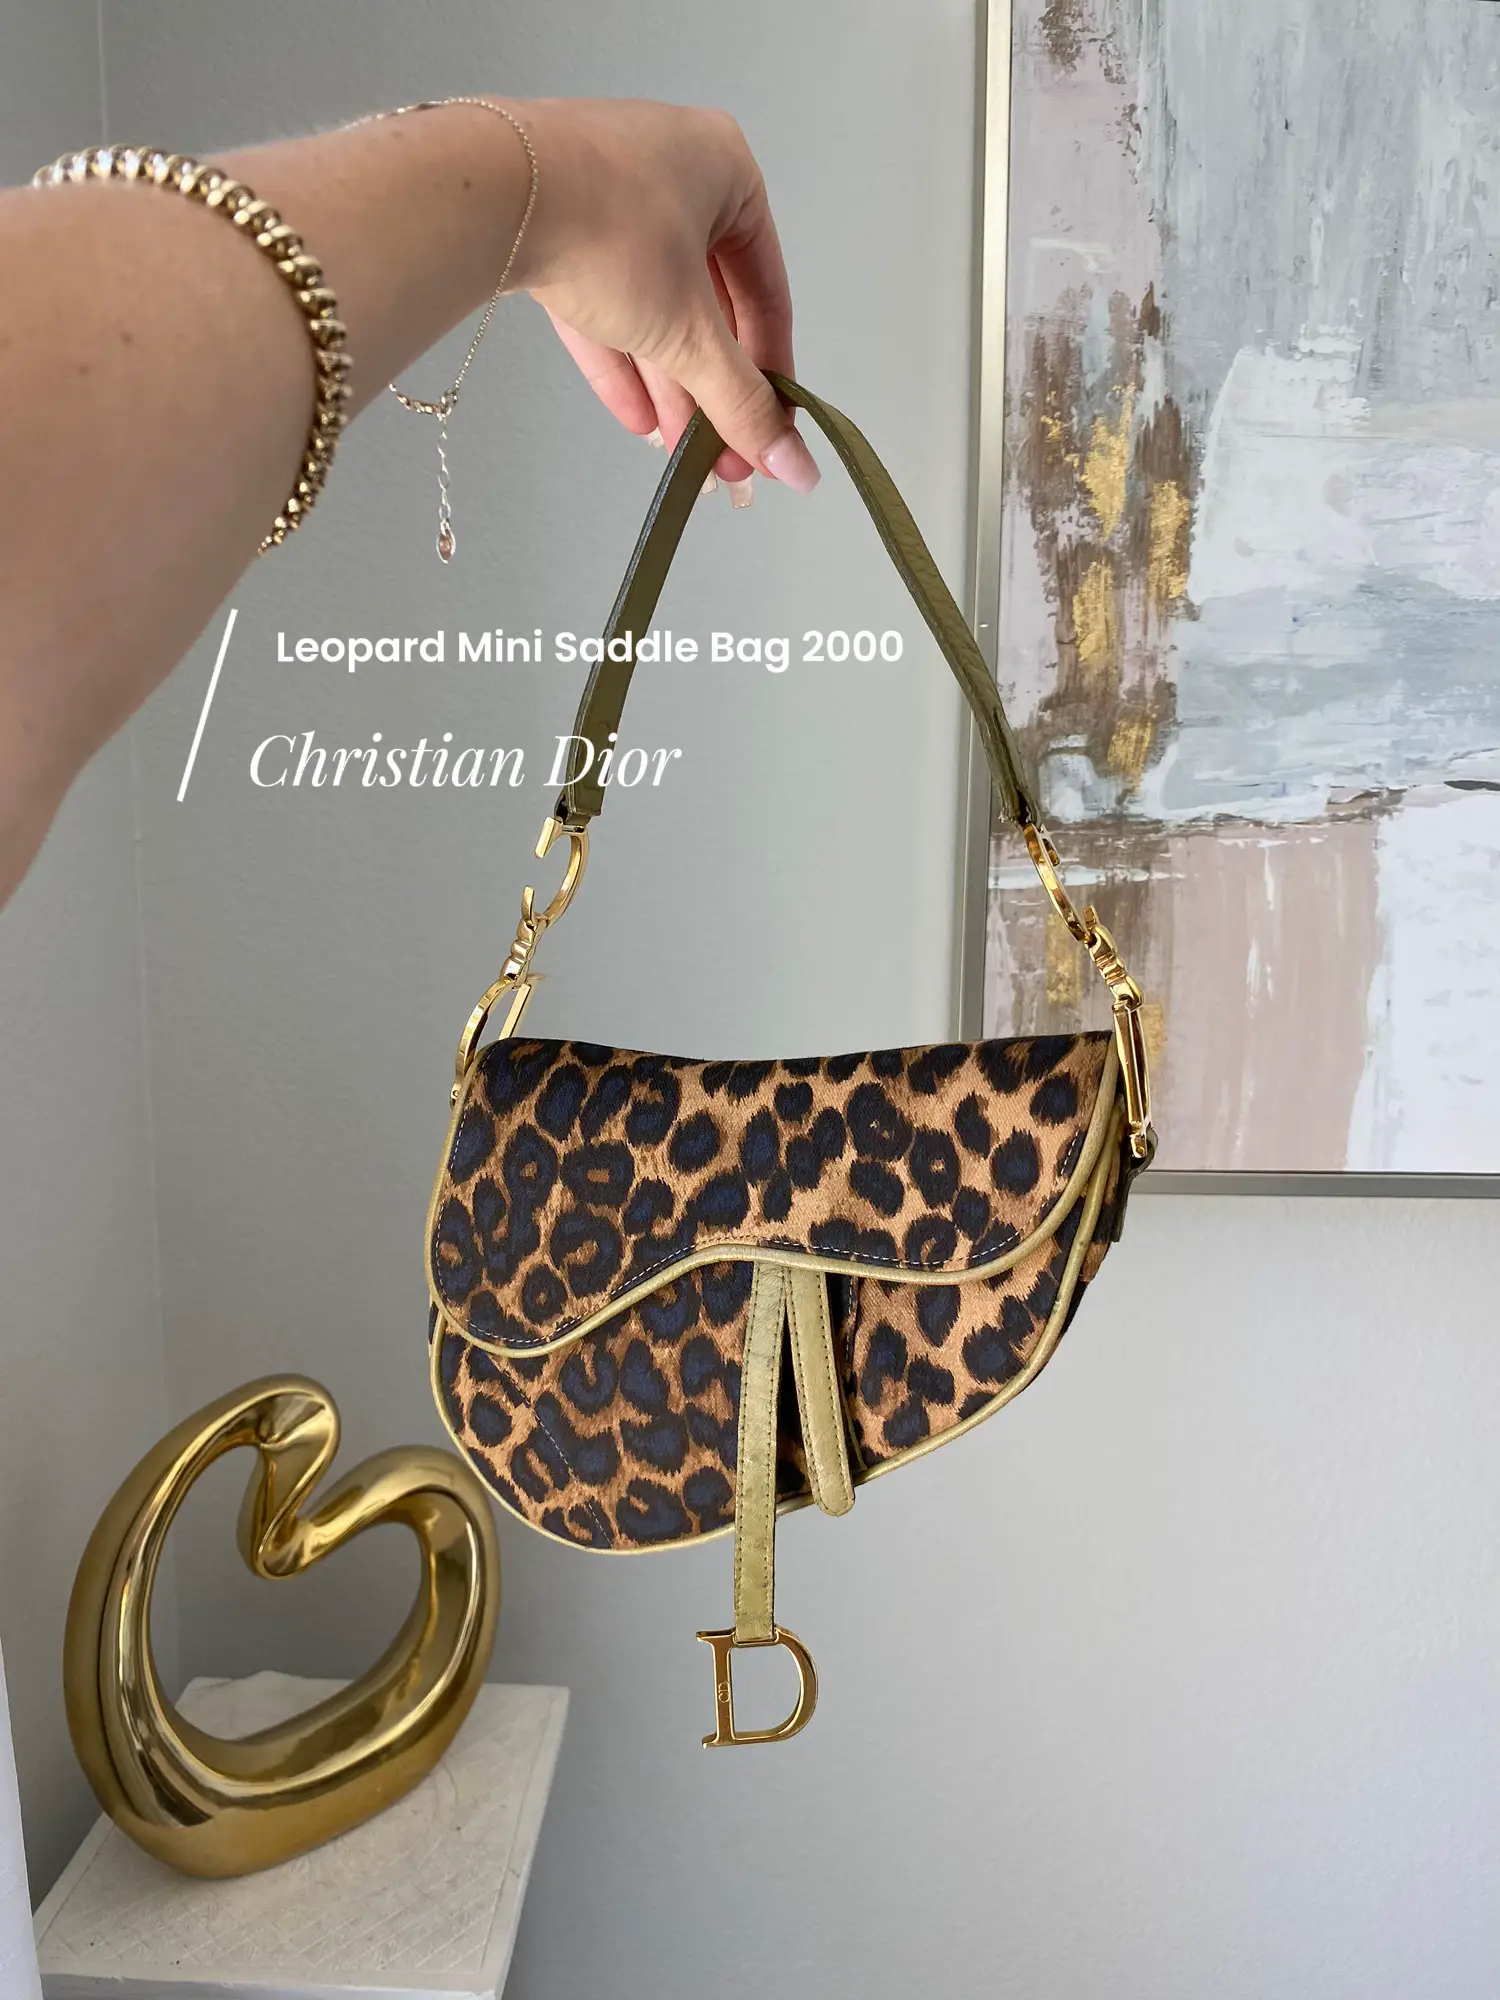 My Luxury Designer Bag Collection, Gallery posted by Caitlin Eliza